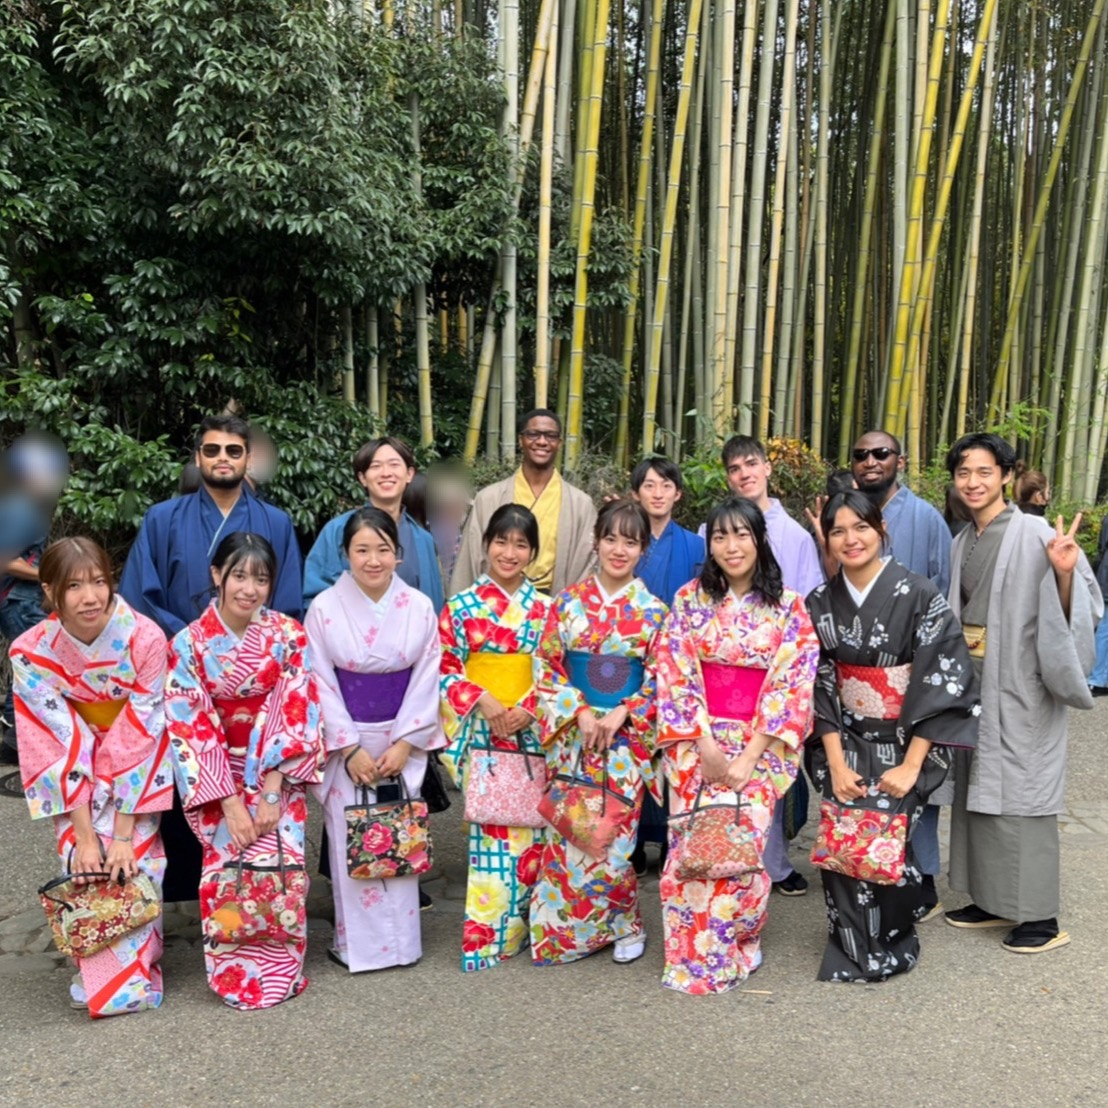 Students dressed in kimonos smile for a group photo in front of a bamboo forest